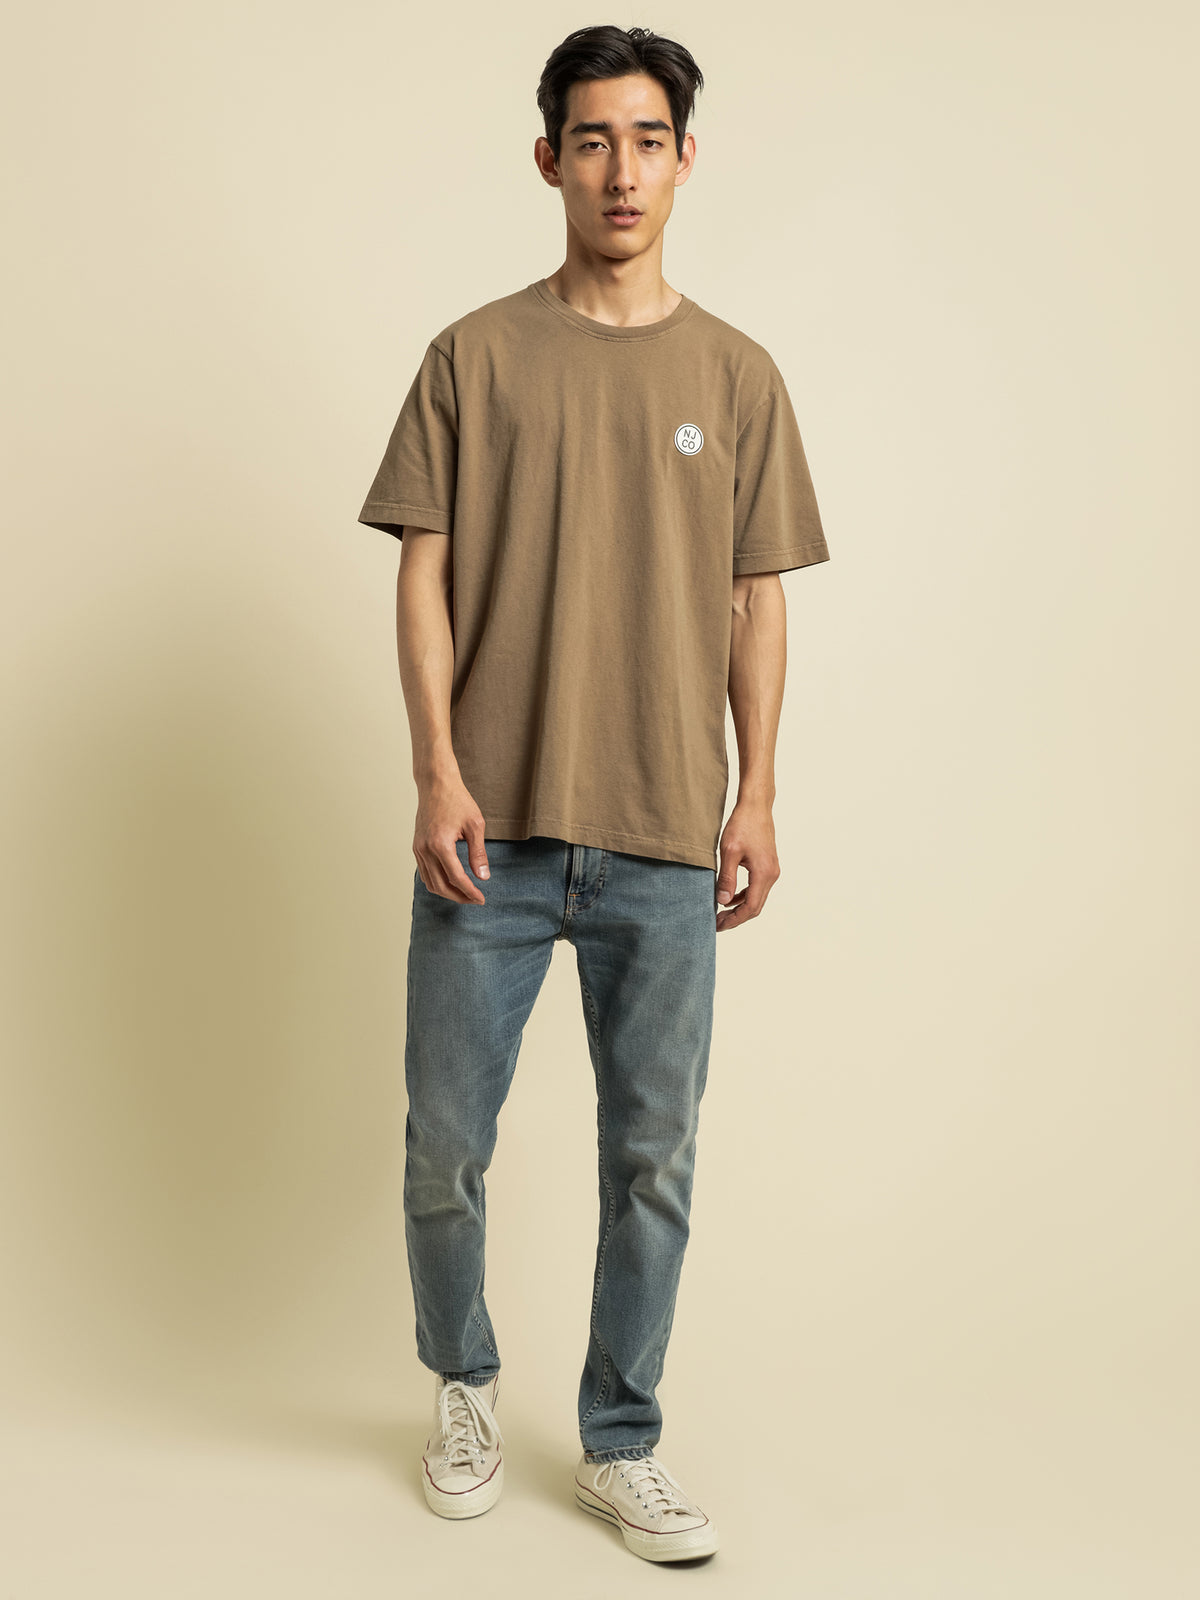 Uno NJCO Circle T-Shirt in Brown